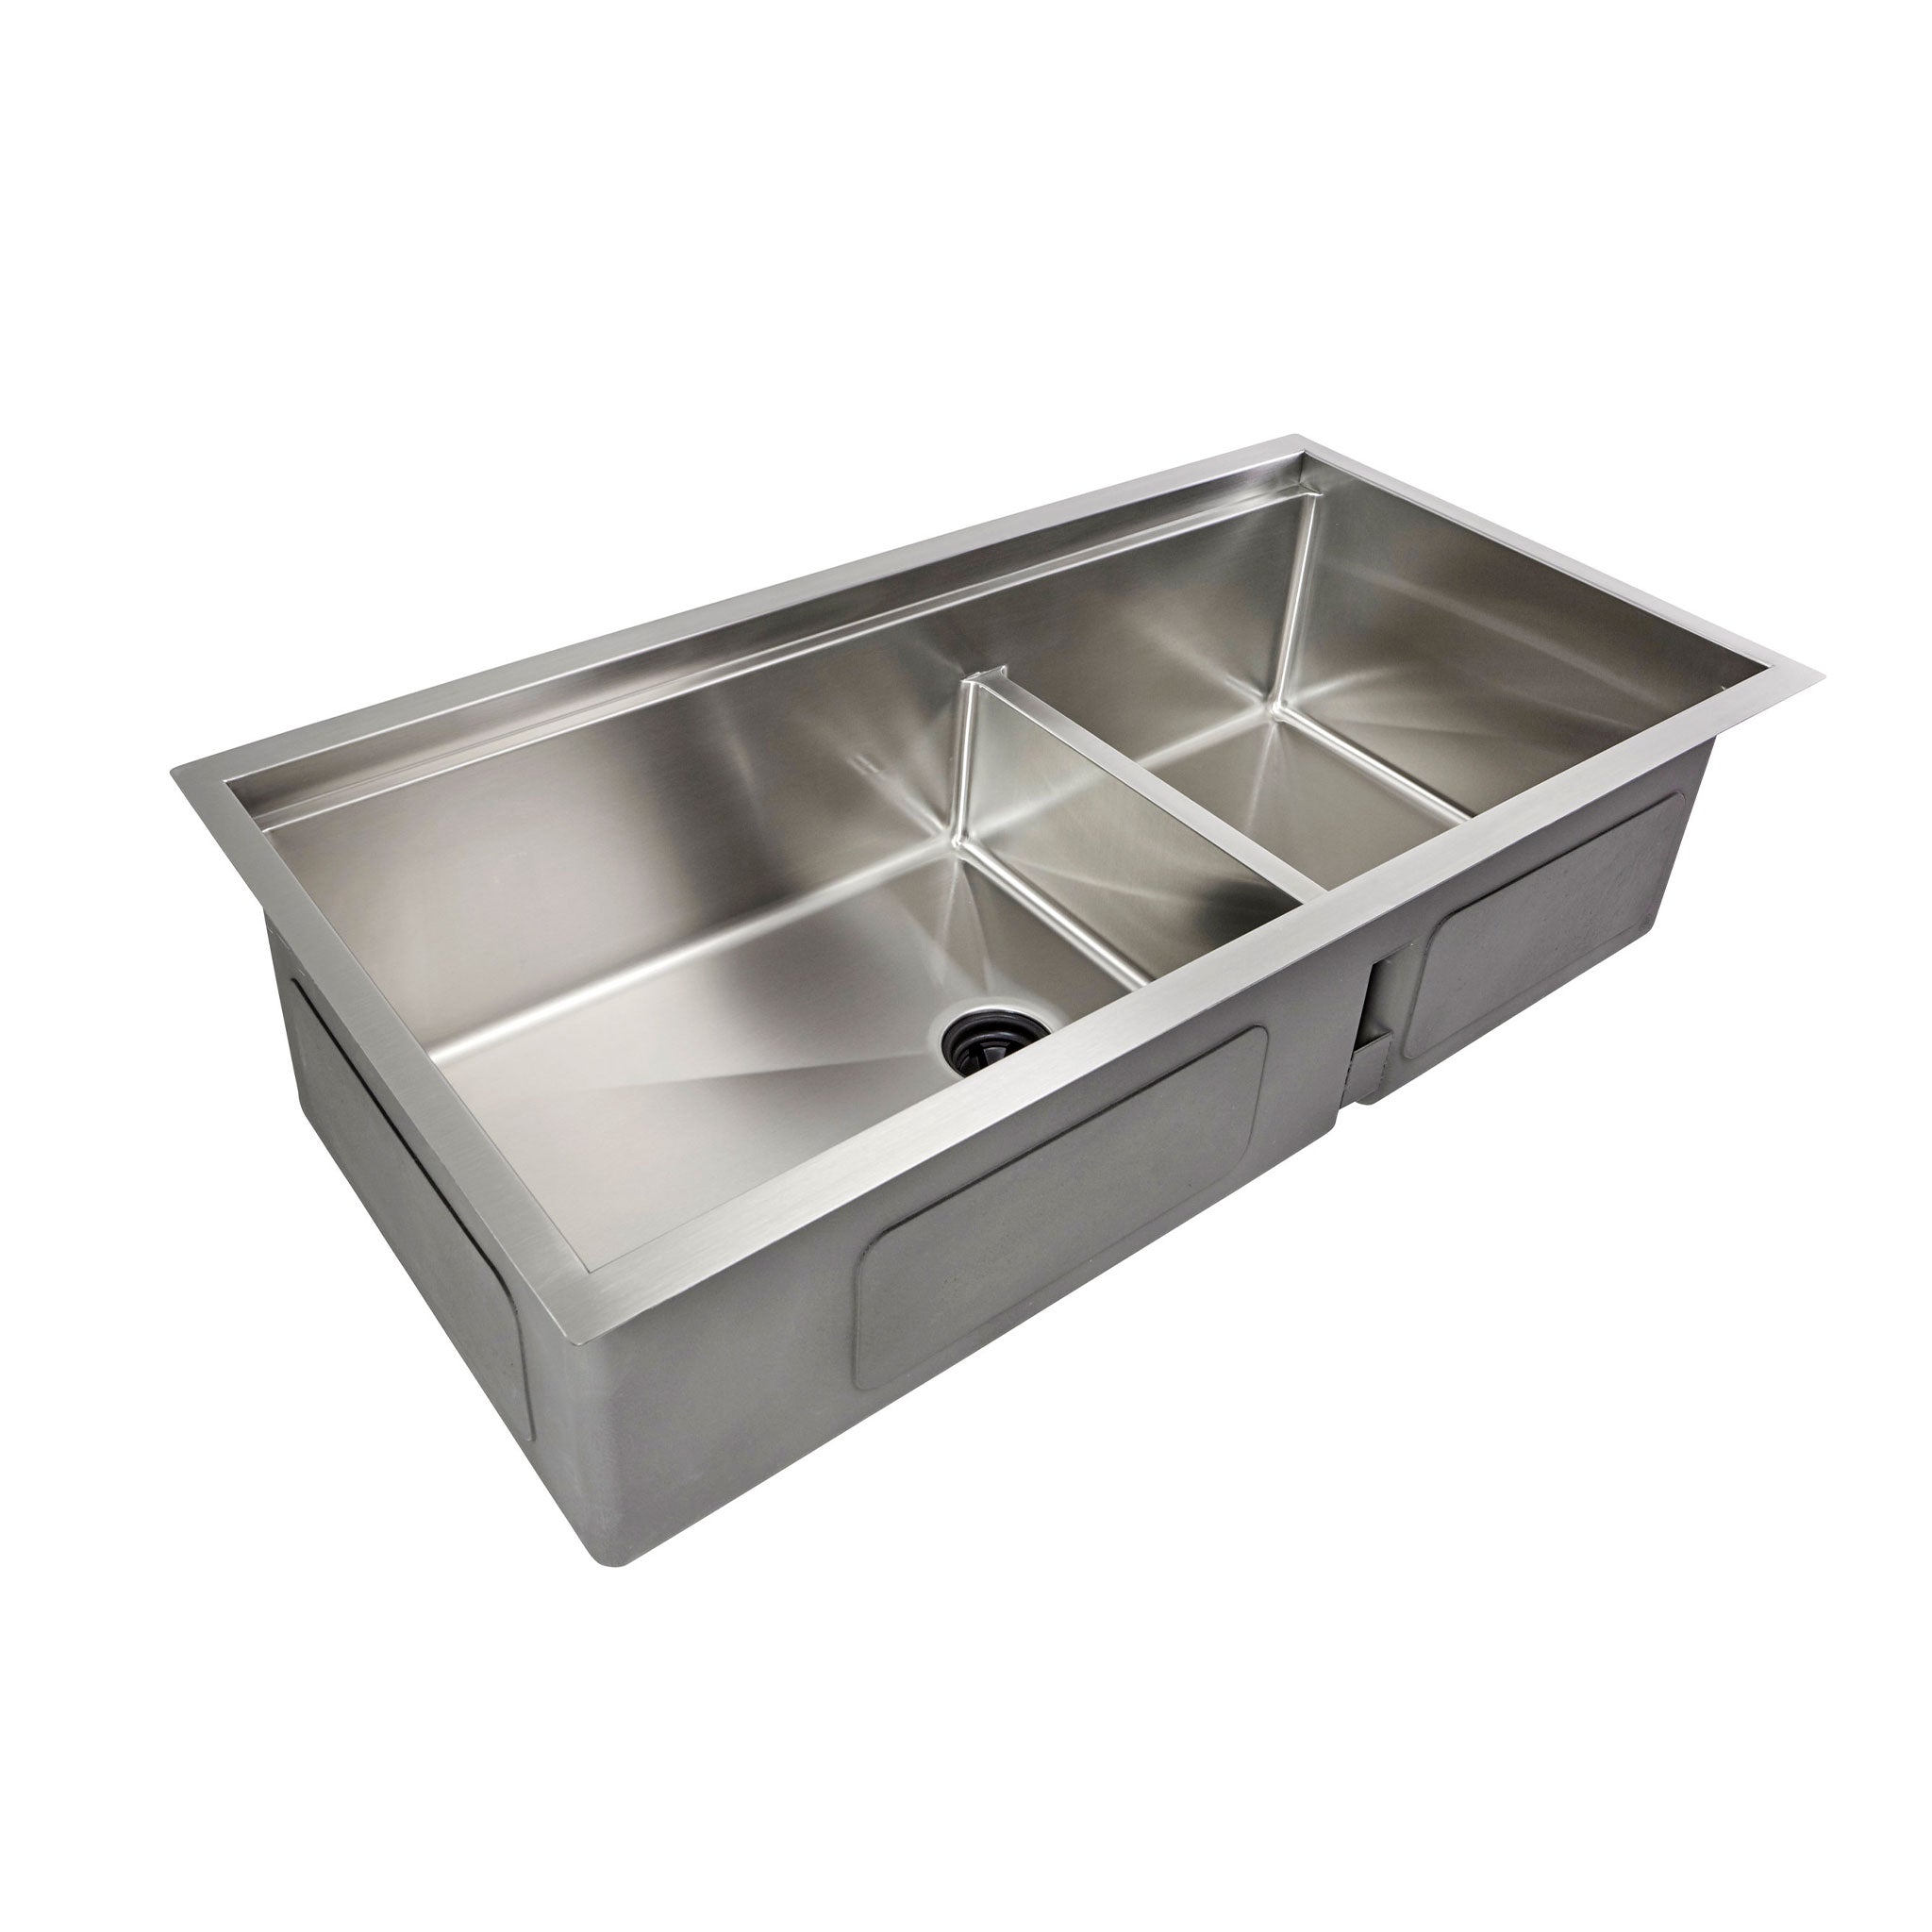 Create Good Sinks large 39 inch double bowl workstation sink in stainless steel with smart low divider